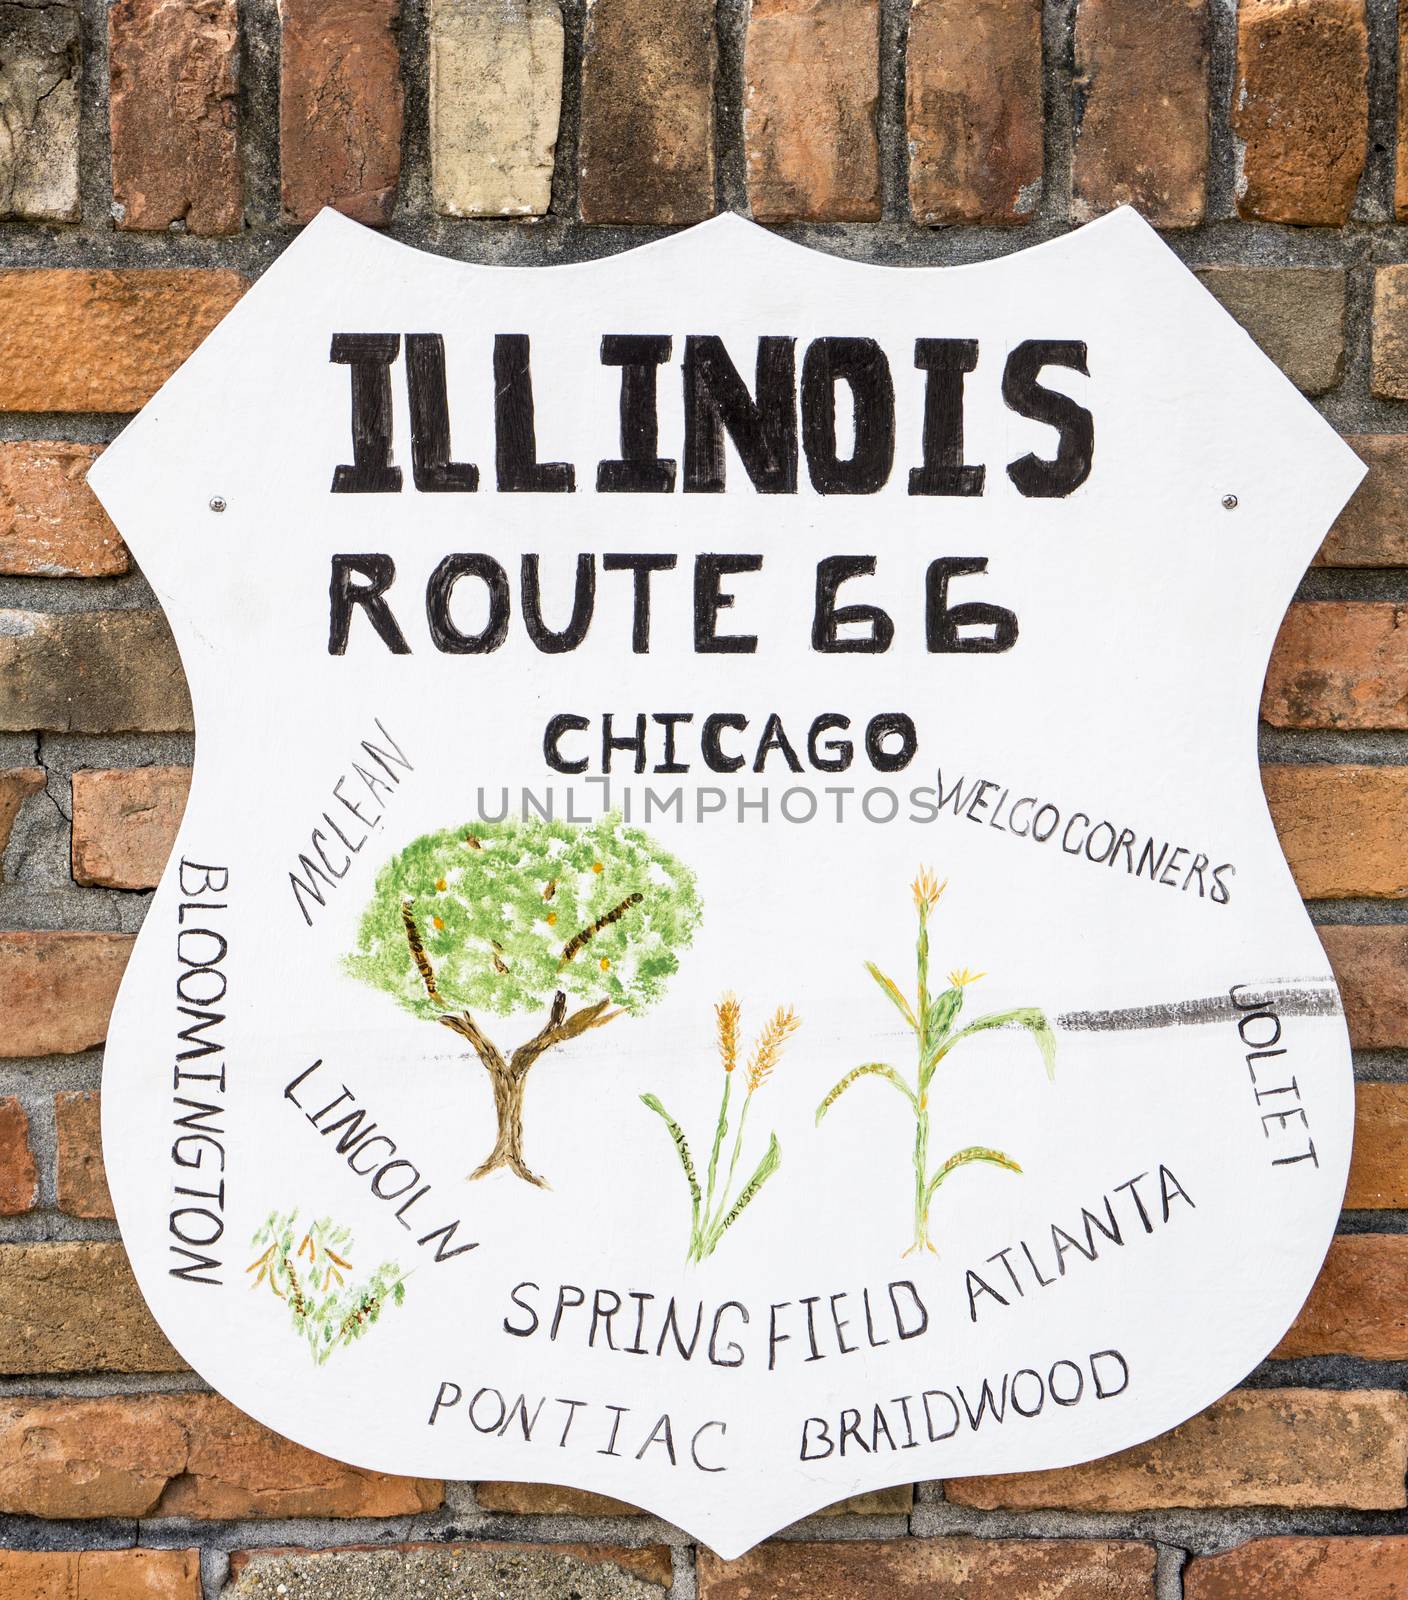 Route 66 wall sign showing the towns along the route in state At by brians101